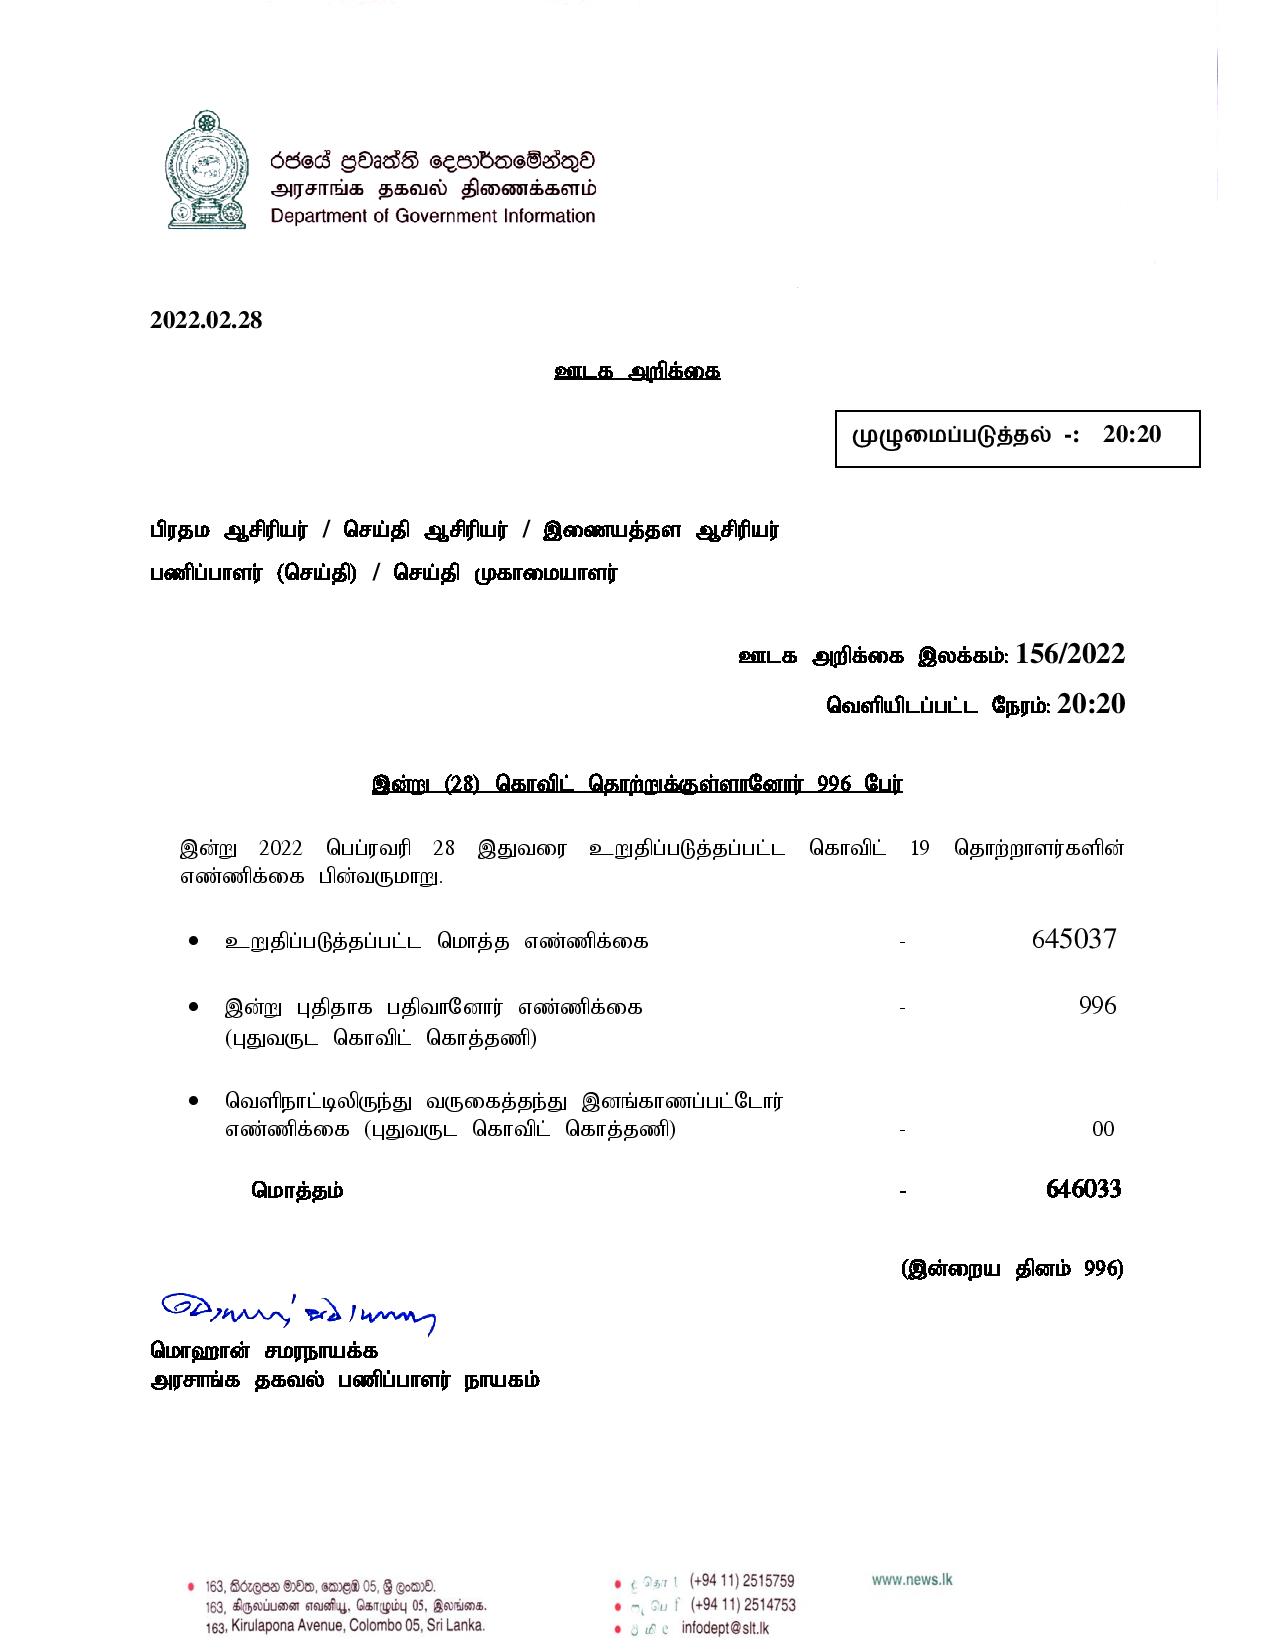 Press Release 156 Tamil page 001